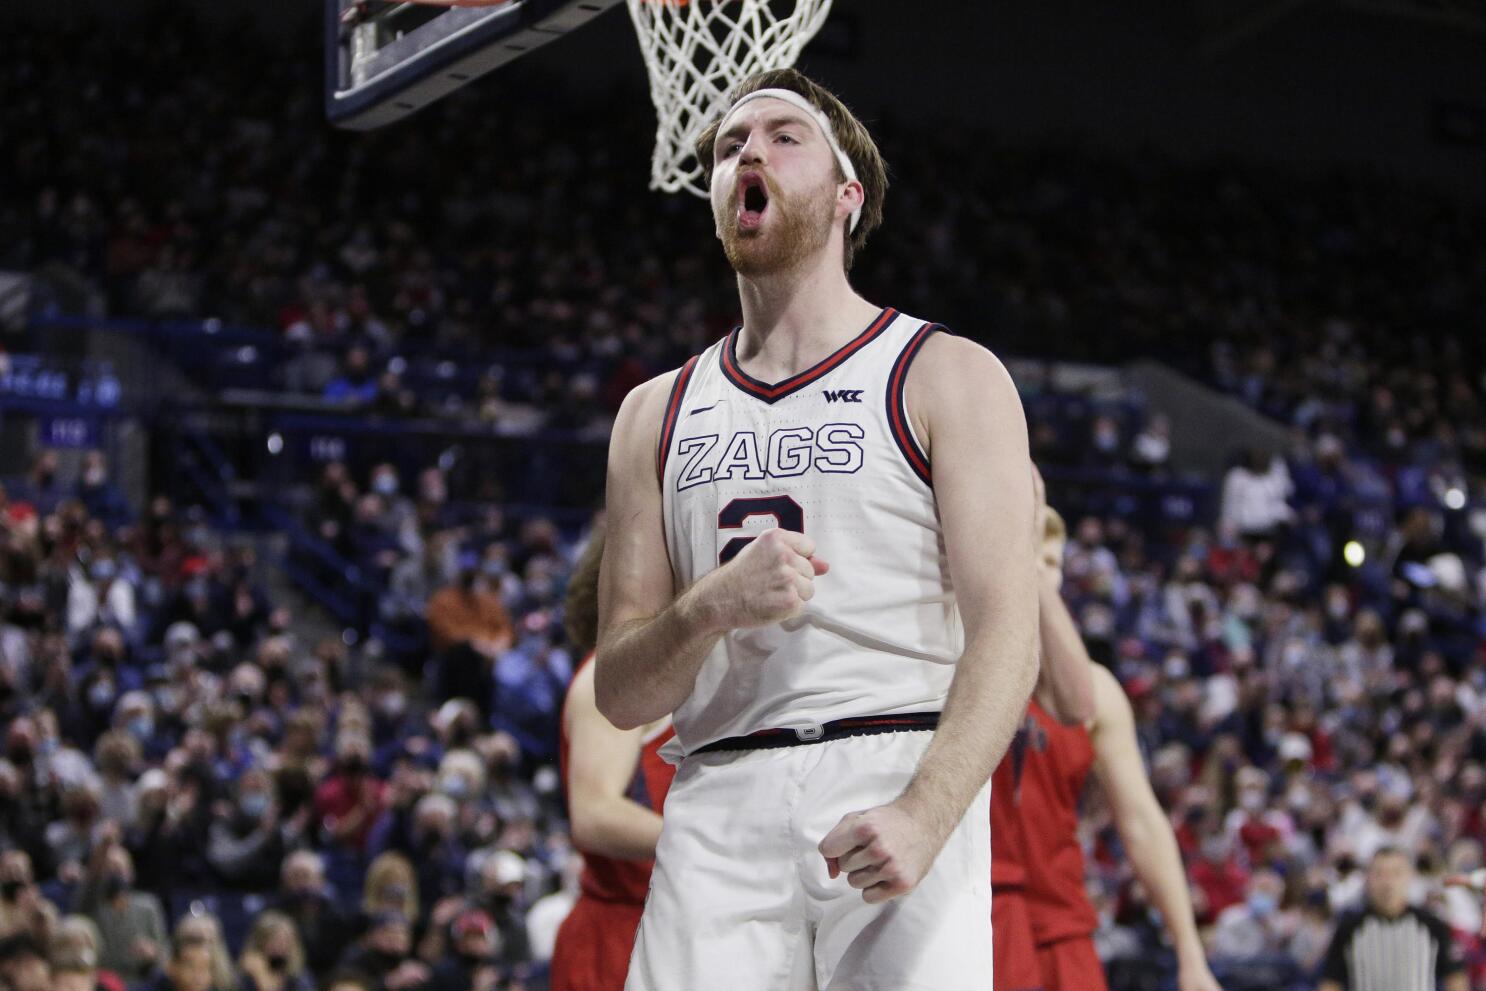 Drew Timme Becomes Zags' All-Time Scoring Leader vs. St. Mary's